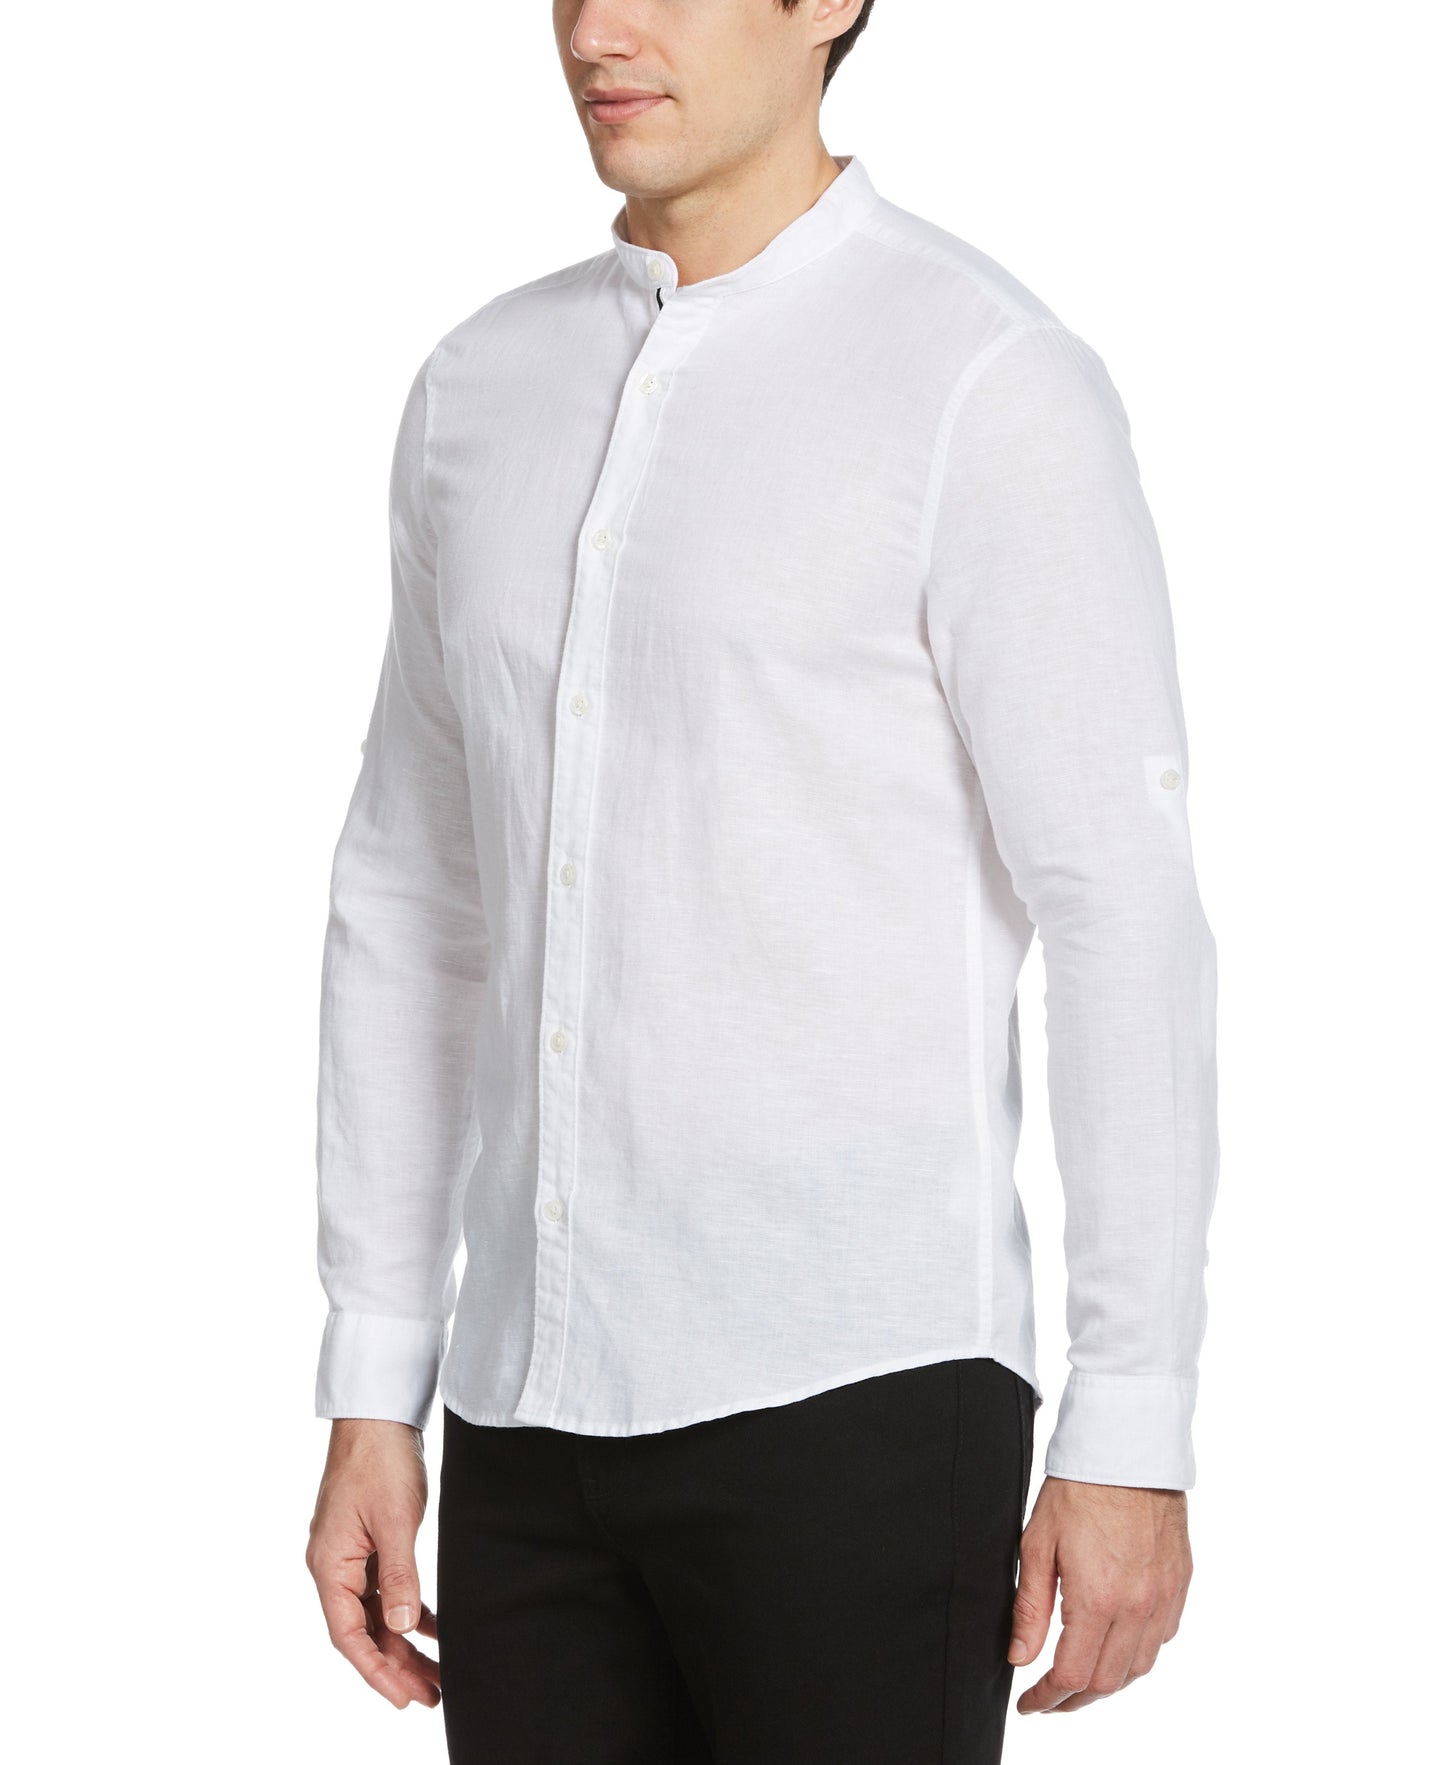 Untucked Linen Blend Roll Sleeve Slim Fit Banded Collar Shirt